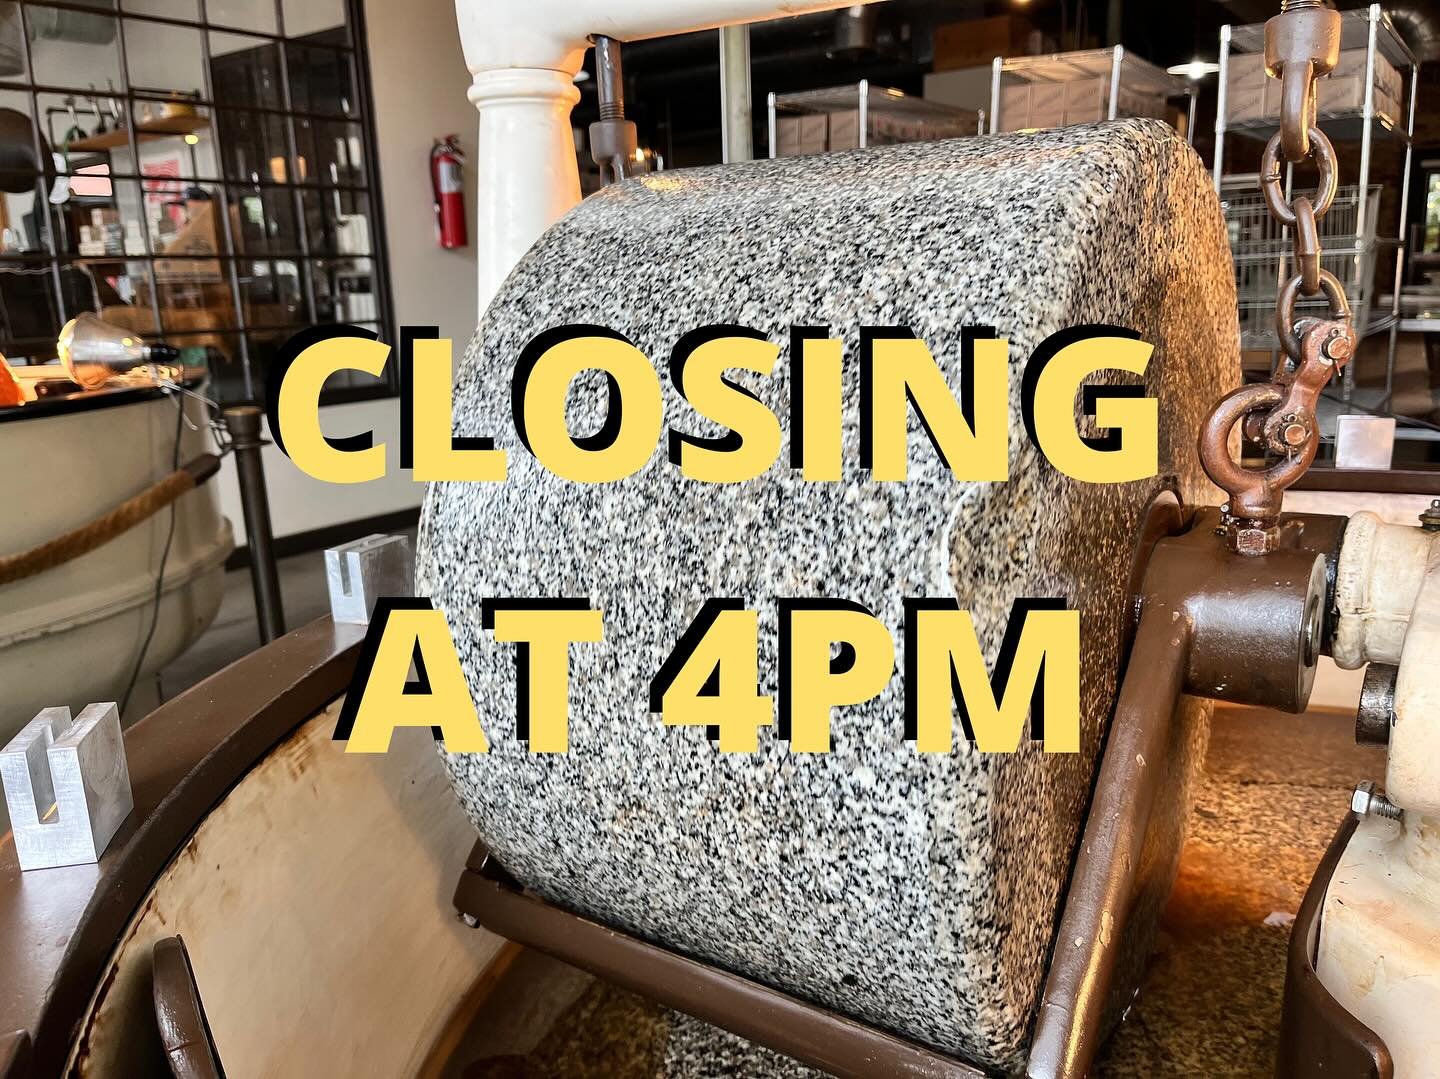 Hey folks, due to some staffing wonkiness today we&rsquo;re going to pack up a bit early today but will be back to our regularly scheduled programming tomorrow! Sorry for the inconvenience and we can&rsquo;t wait to see you tomorrow!&bull;
&bull;
#ol